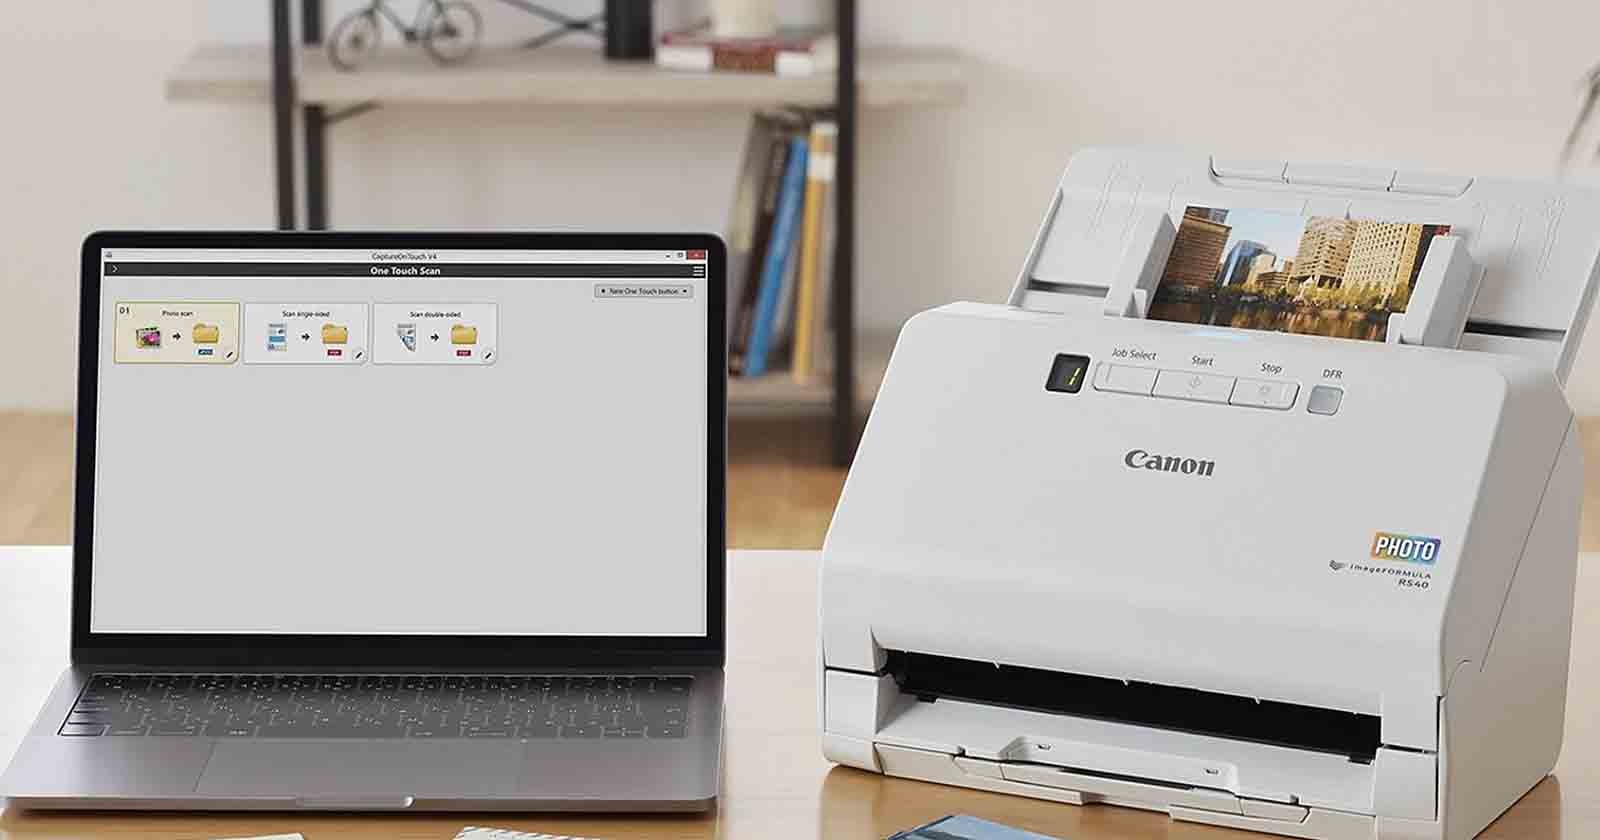 Canons New imageFORMULA RS40 Can Scan 30 Photos Per Minute